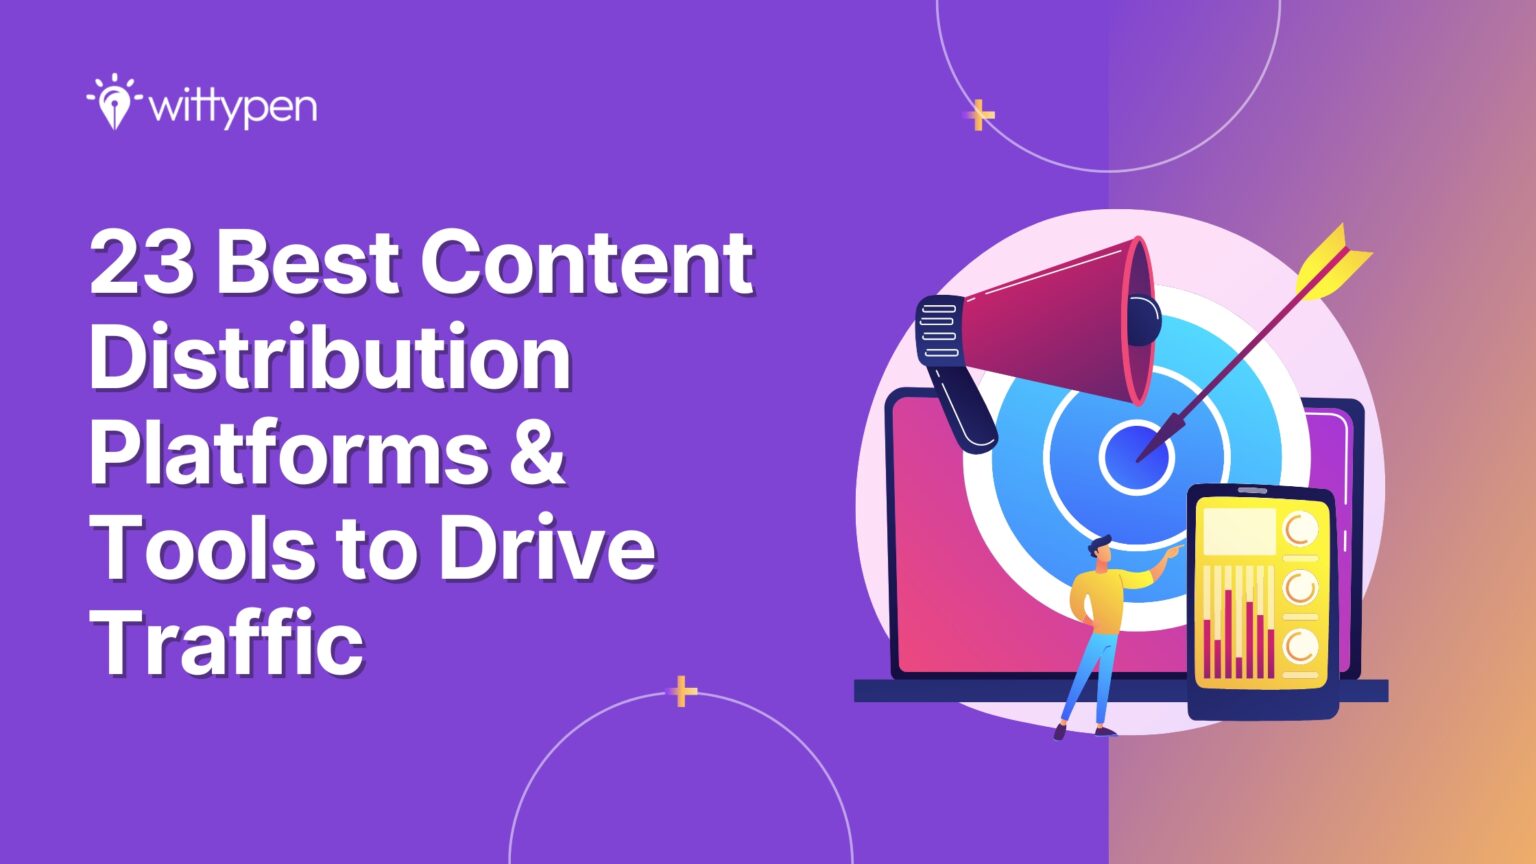 featured image for blog: 23 Best Content Distribution Platforms & Tools to Drive Traffic